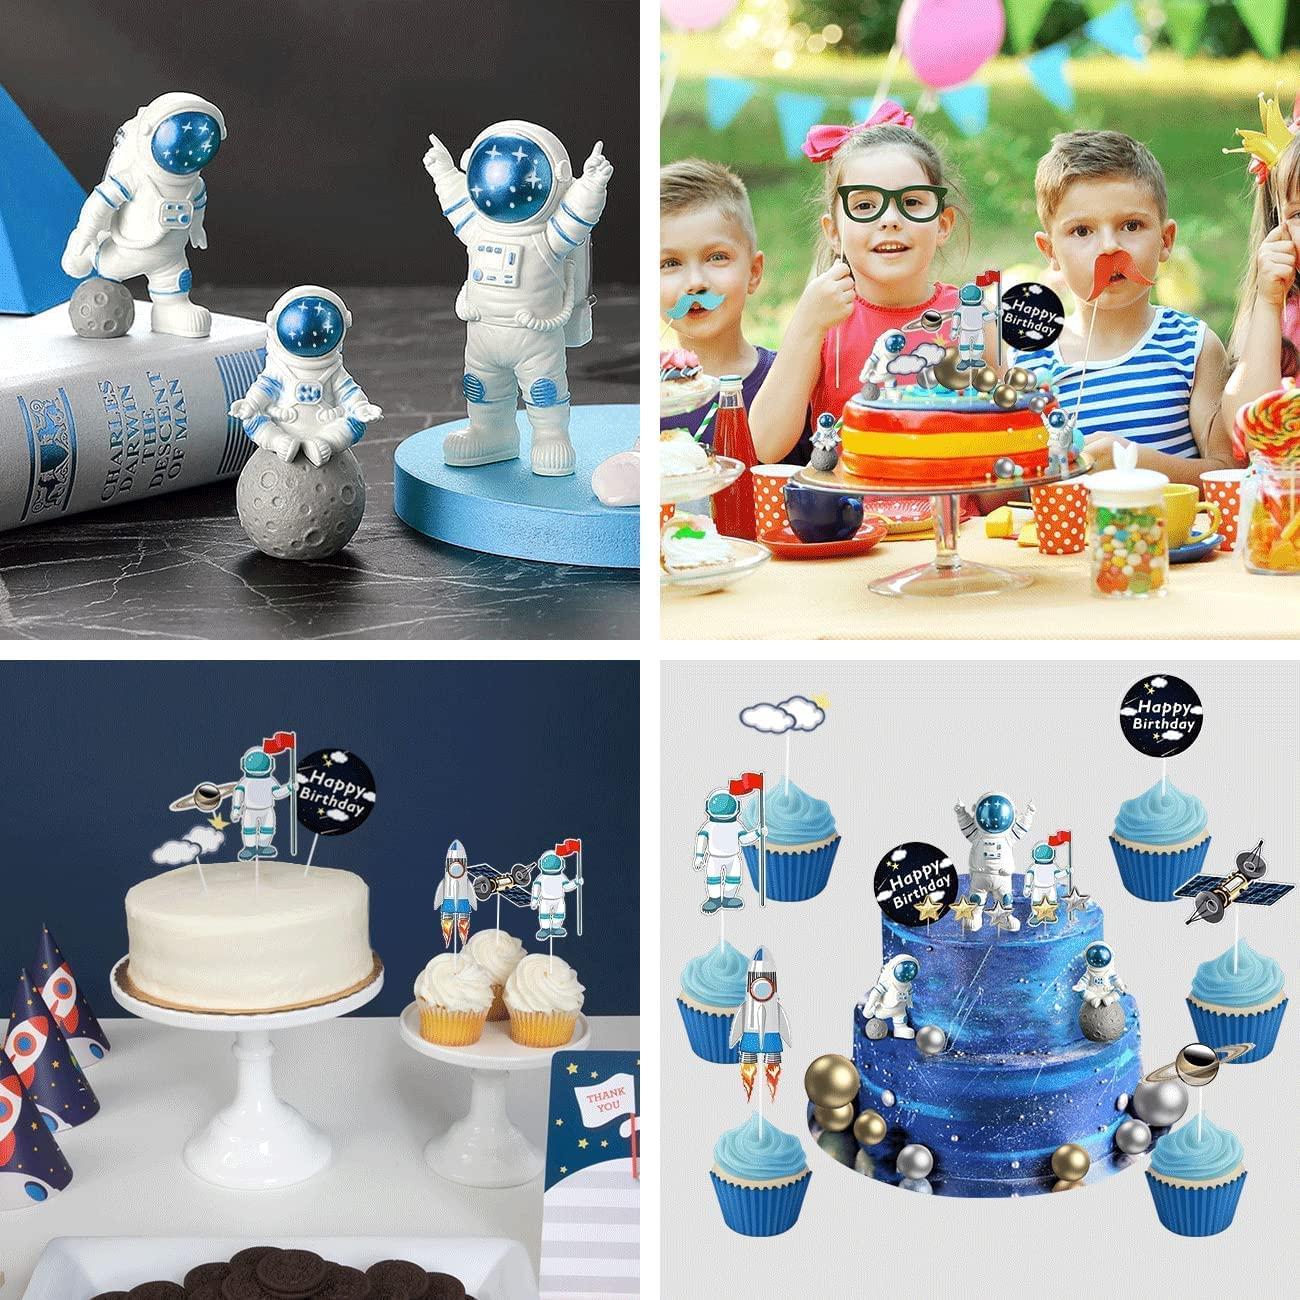 15 Amazing Space Themed Birthday Cake Ideas (Out Of This World) | Themed  birthday cakes, Themed cakes, Boy birthday cake